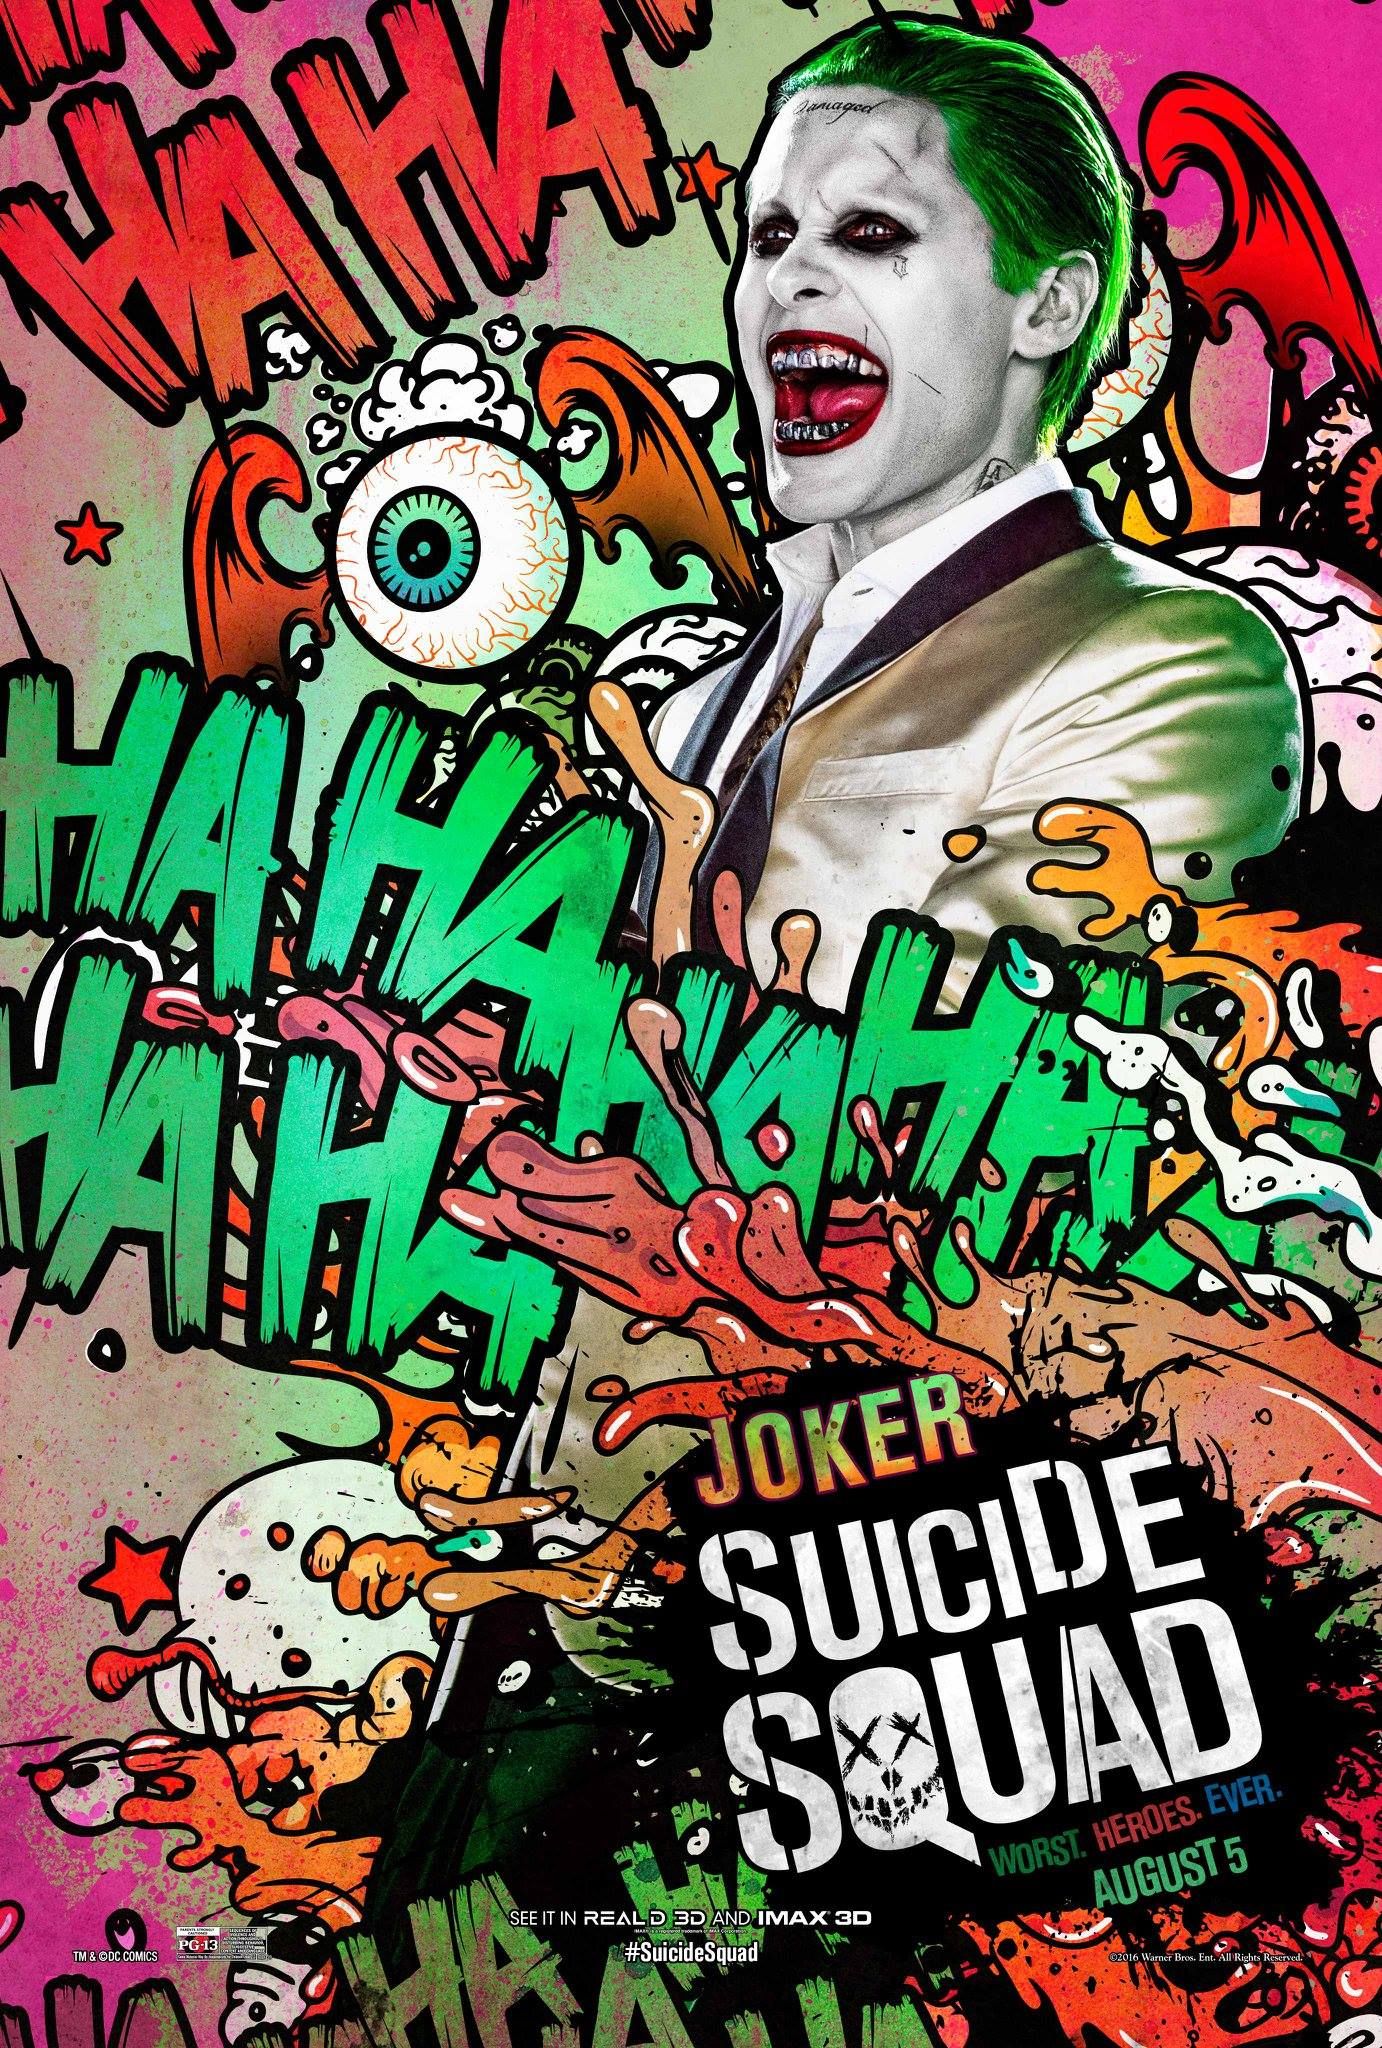 Suicide Squad: New Character Posters Are Just Plain Bad | Collider1382 x 2048